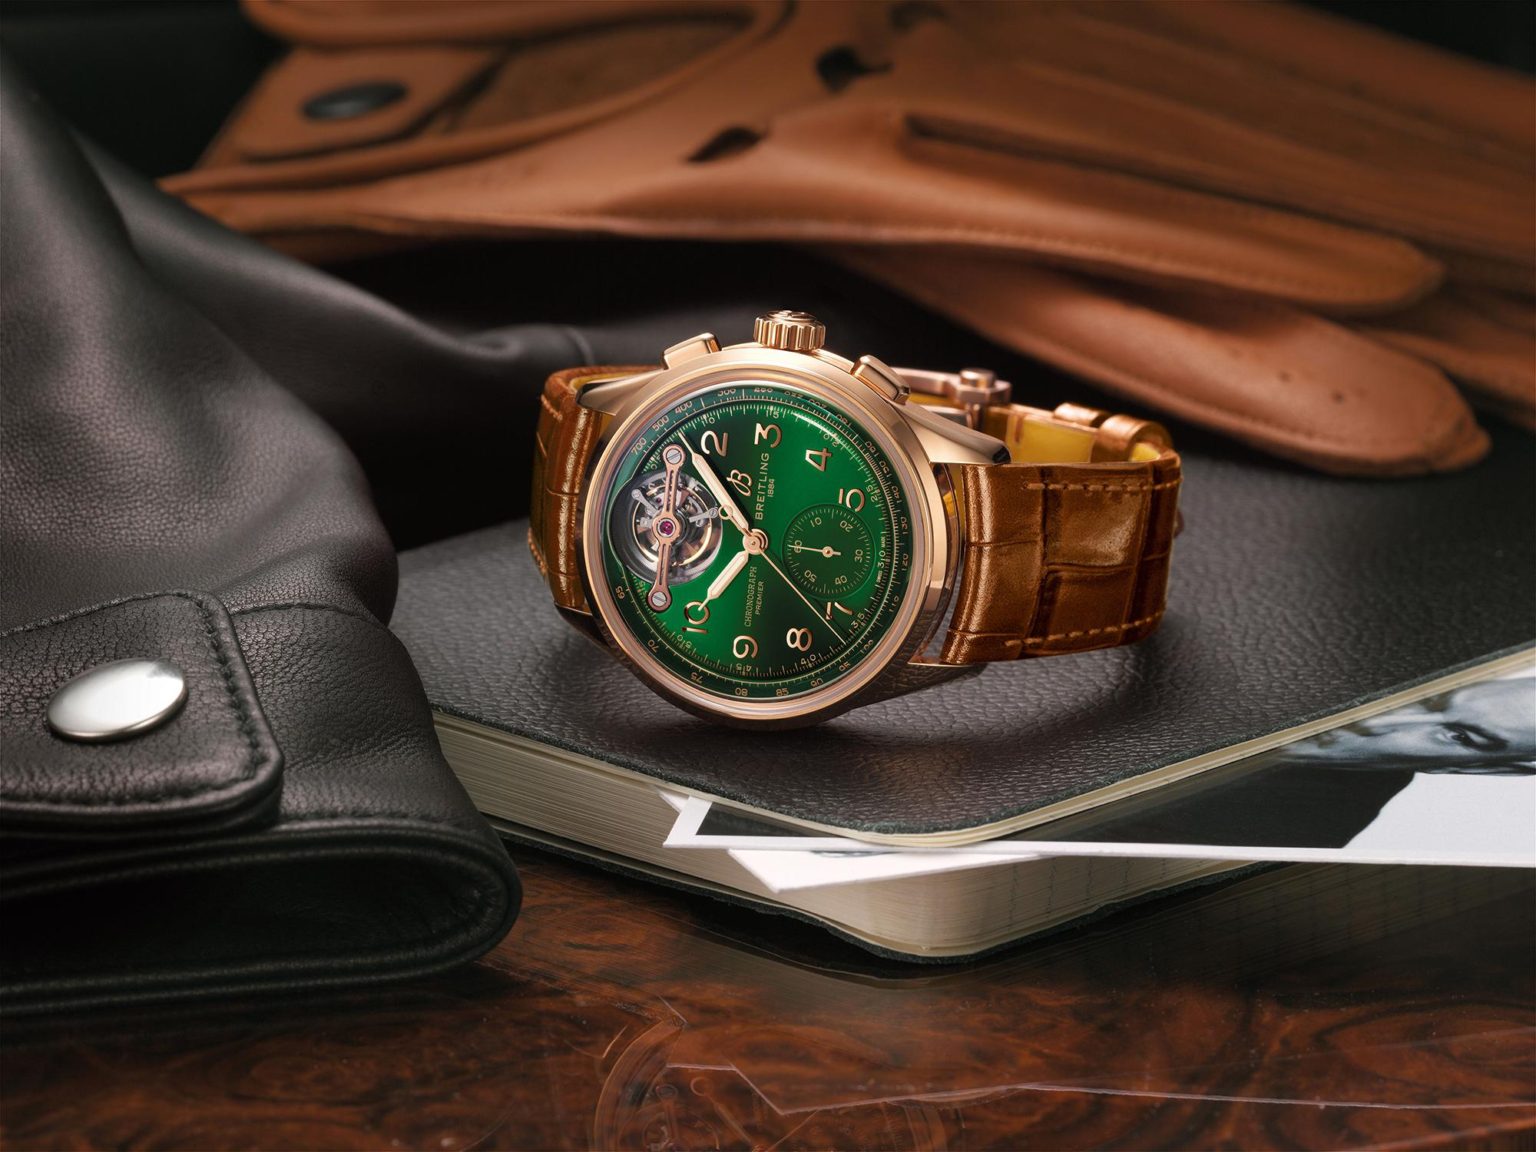 The Breitling Premier B21 Chronograph Tourbillon 42 Bentley Limited Edition is inspired by vintage watches from the 1940s.